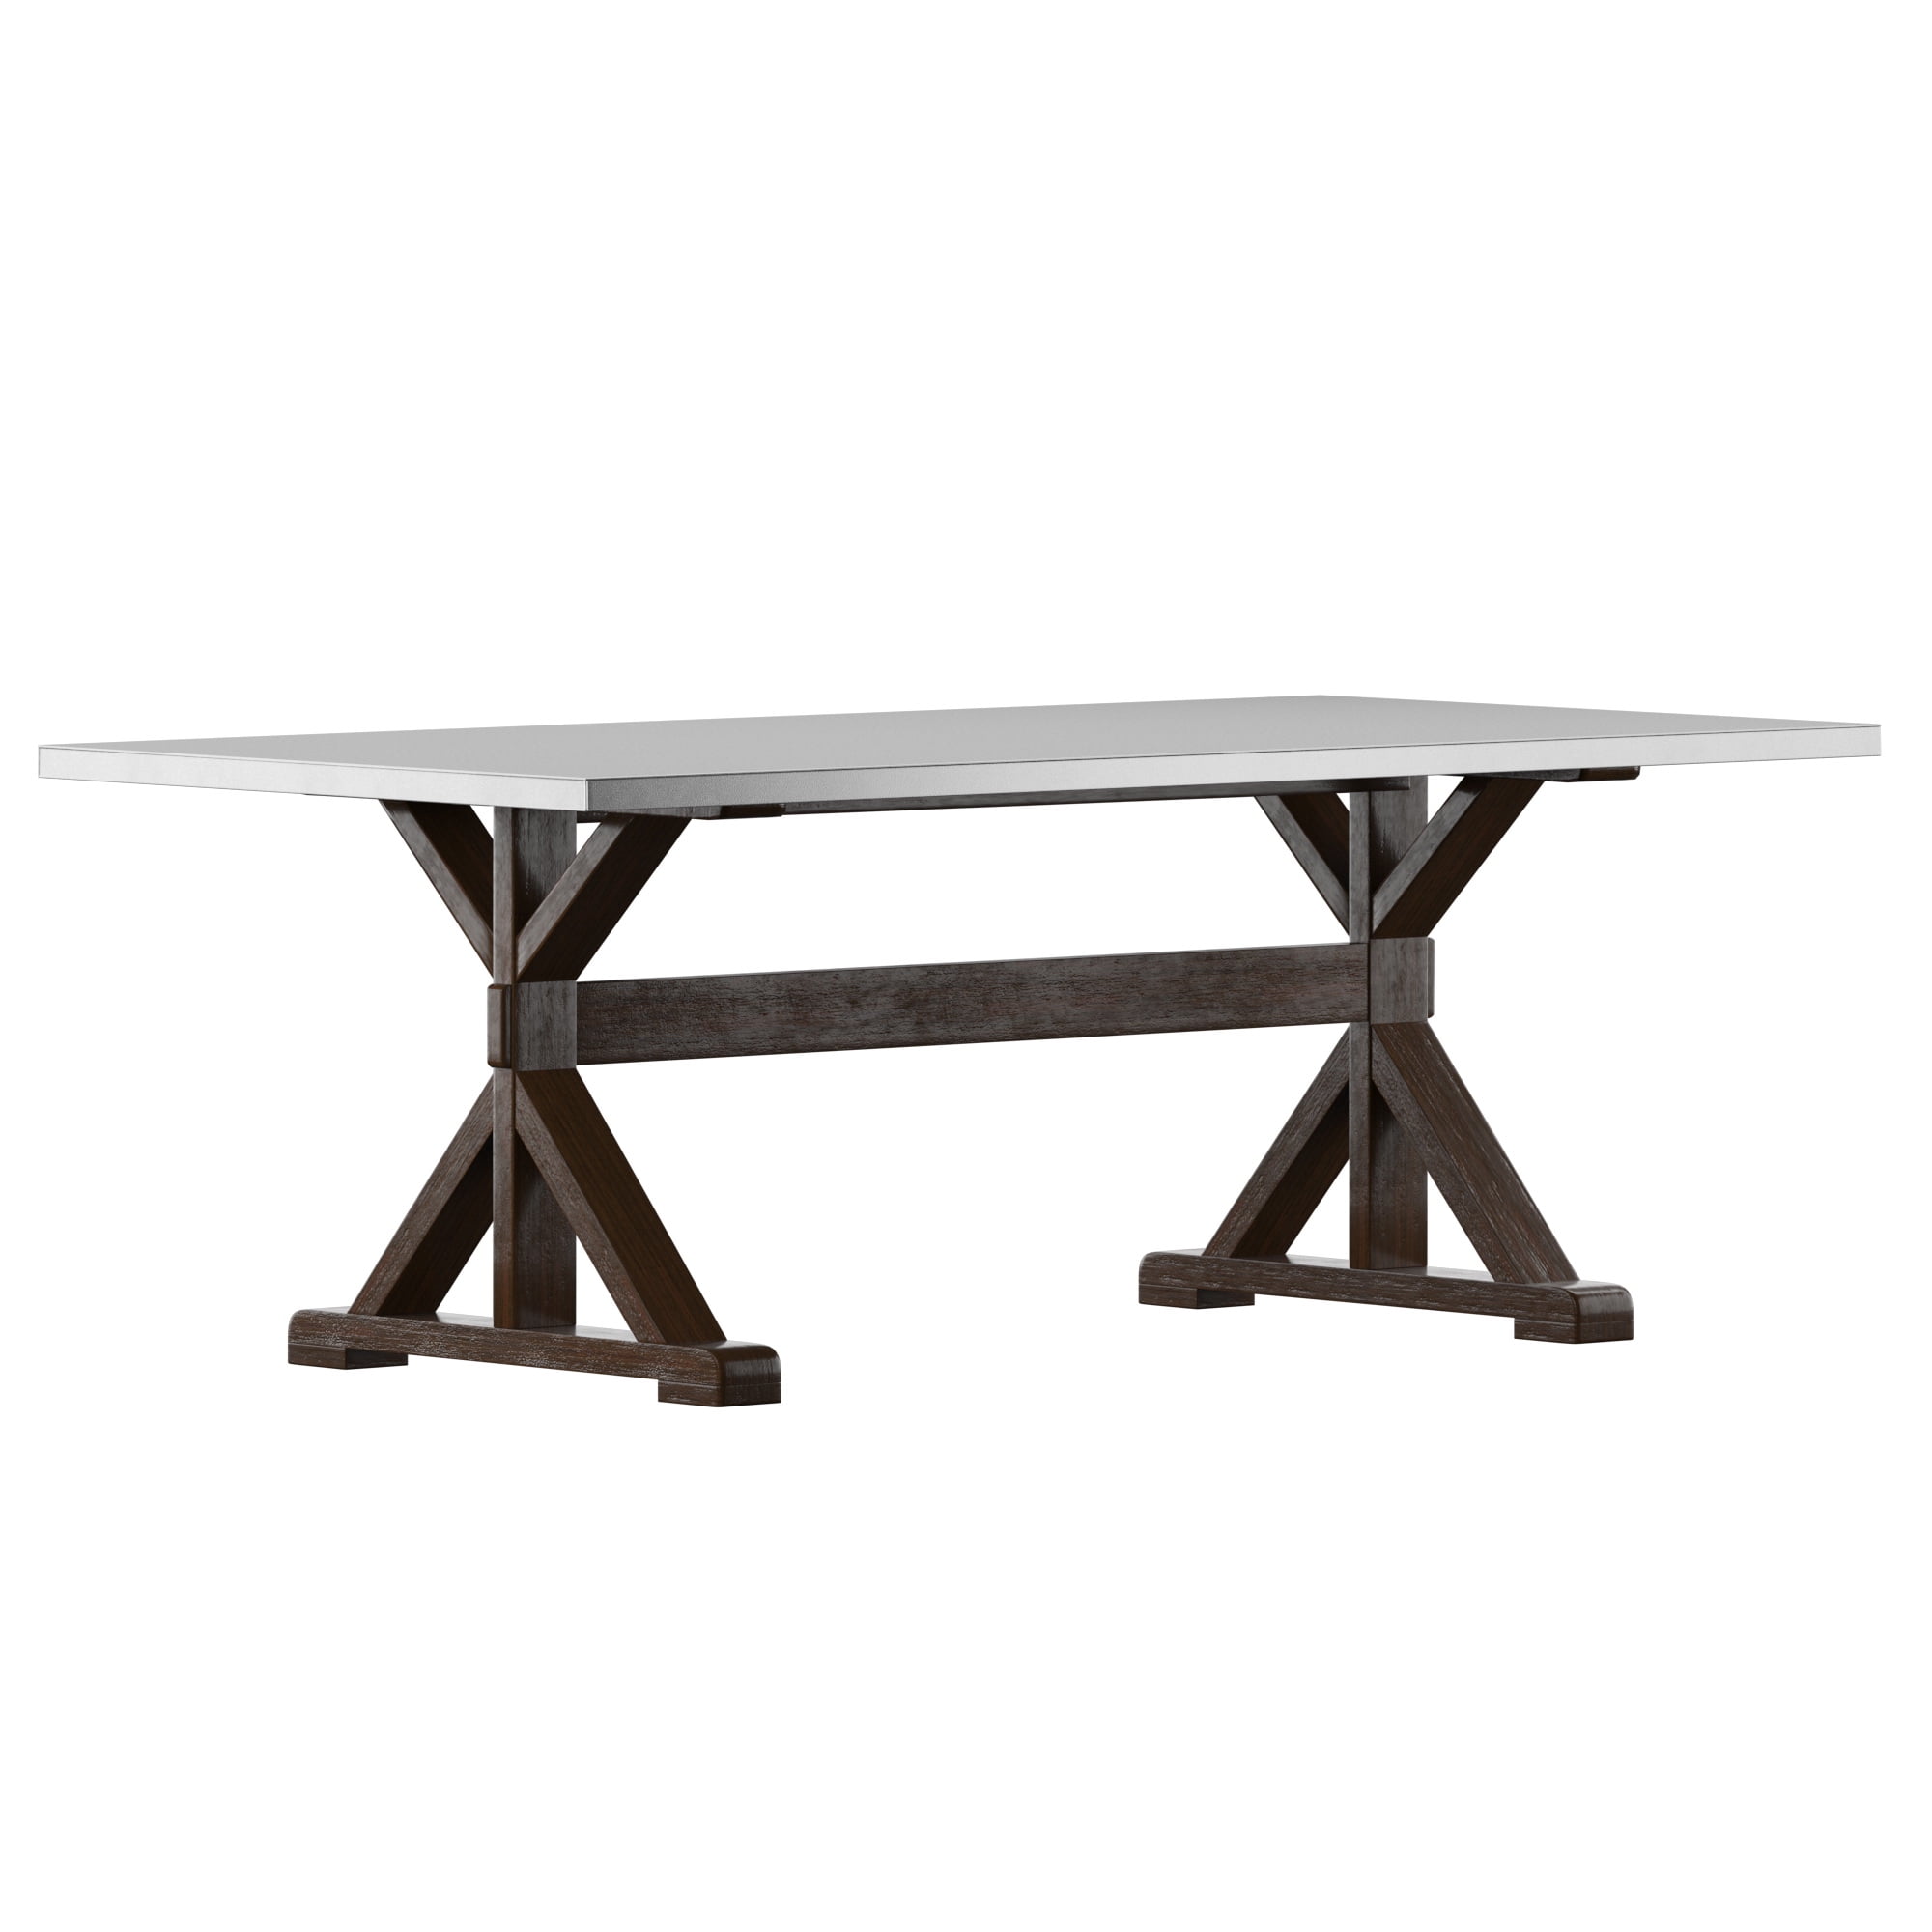 Weston Home Janelly Rectangular Stainless Steel Top Dining Table With Wood Base